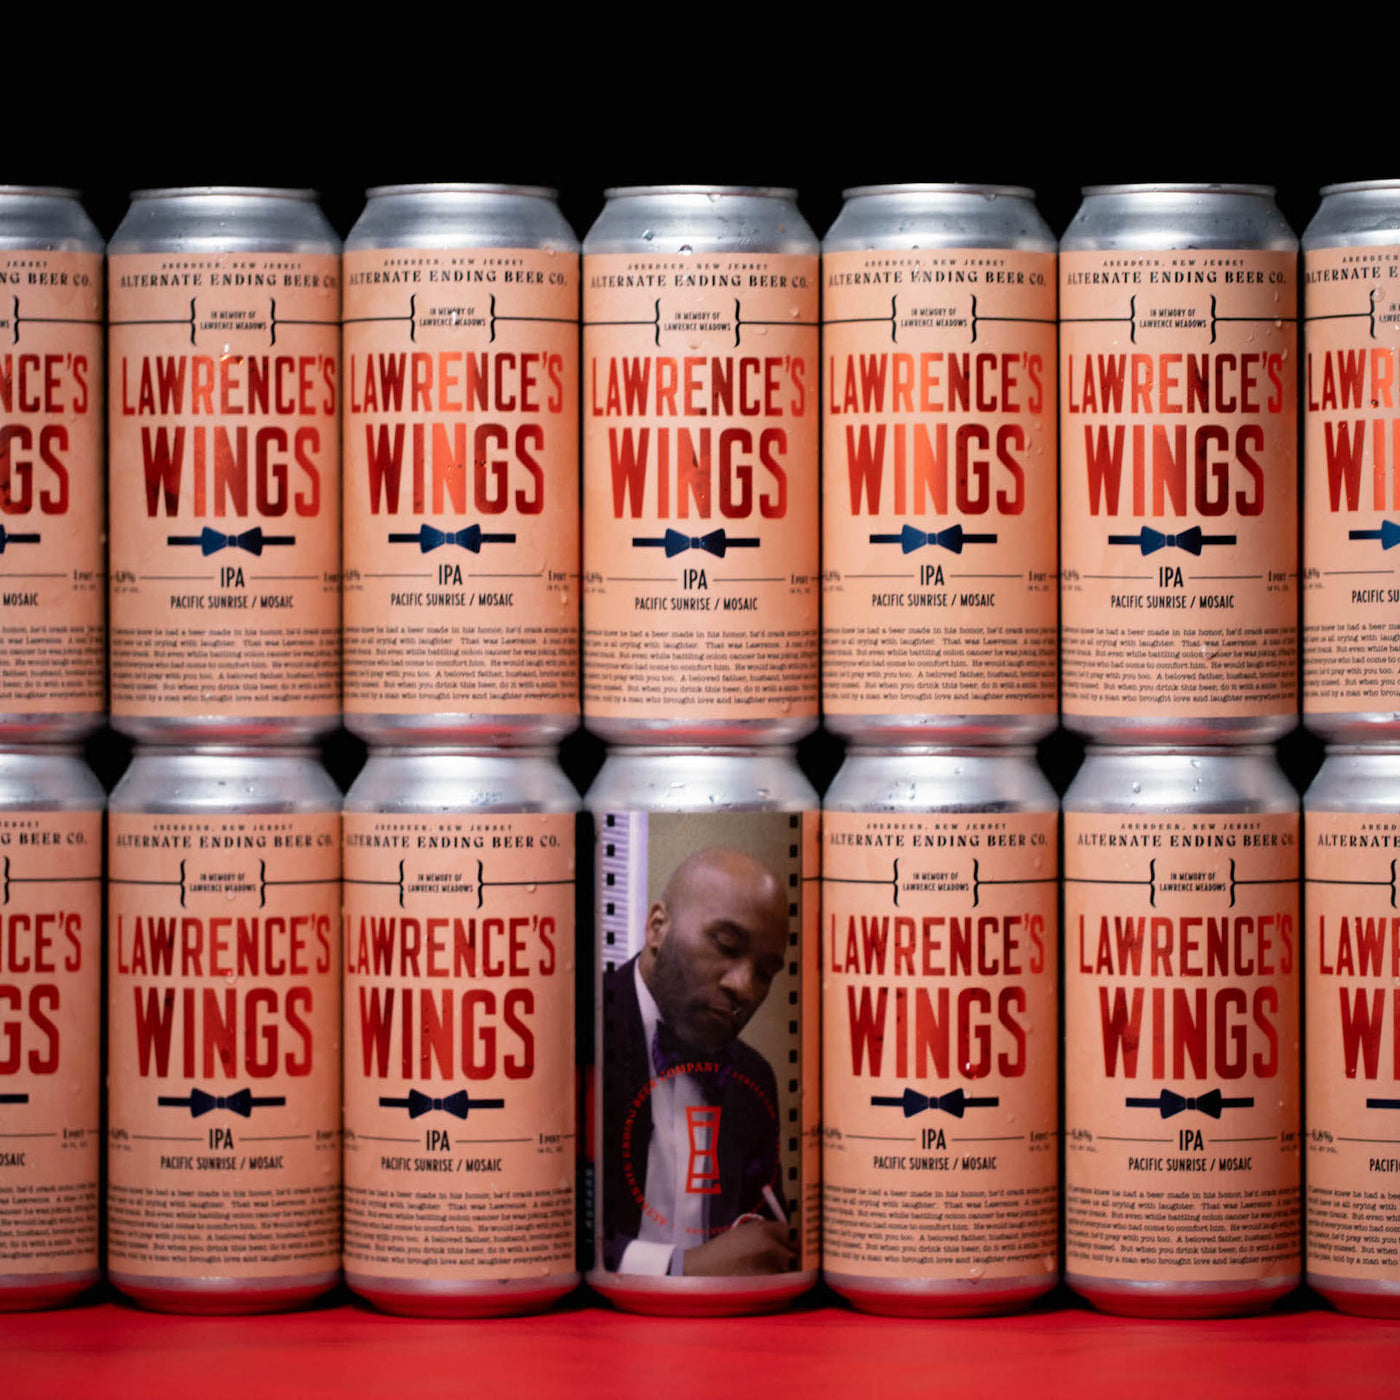 Lawrence's Wings